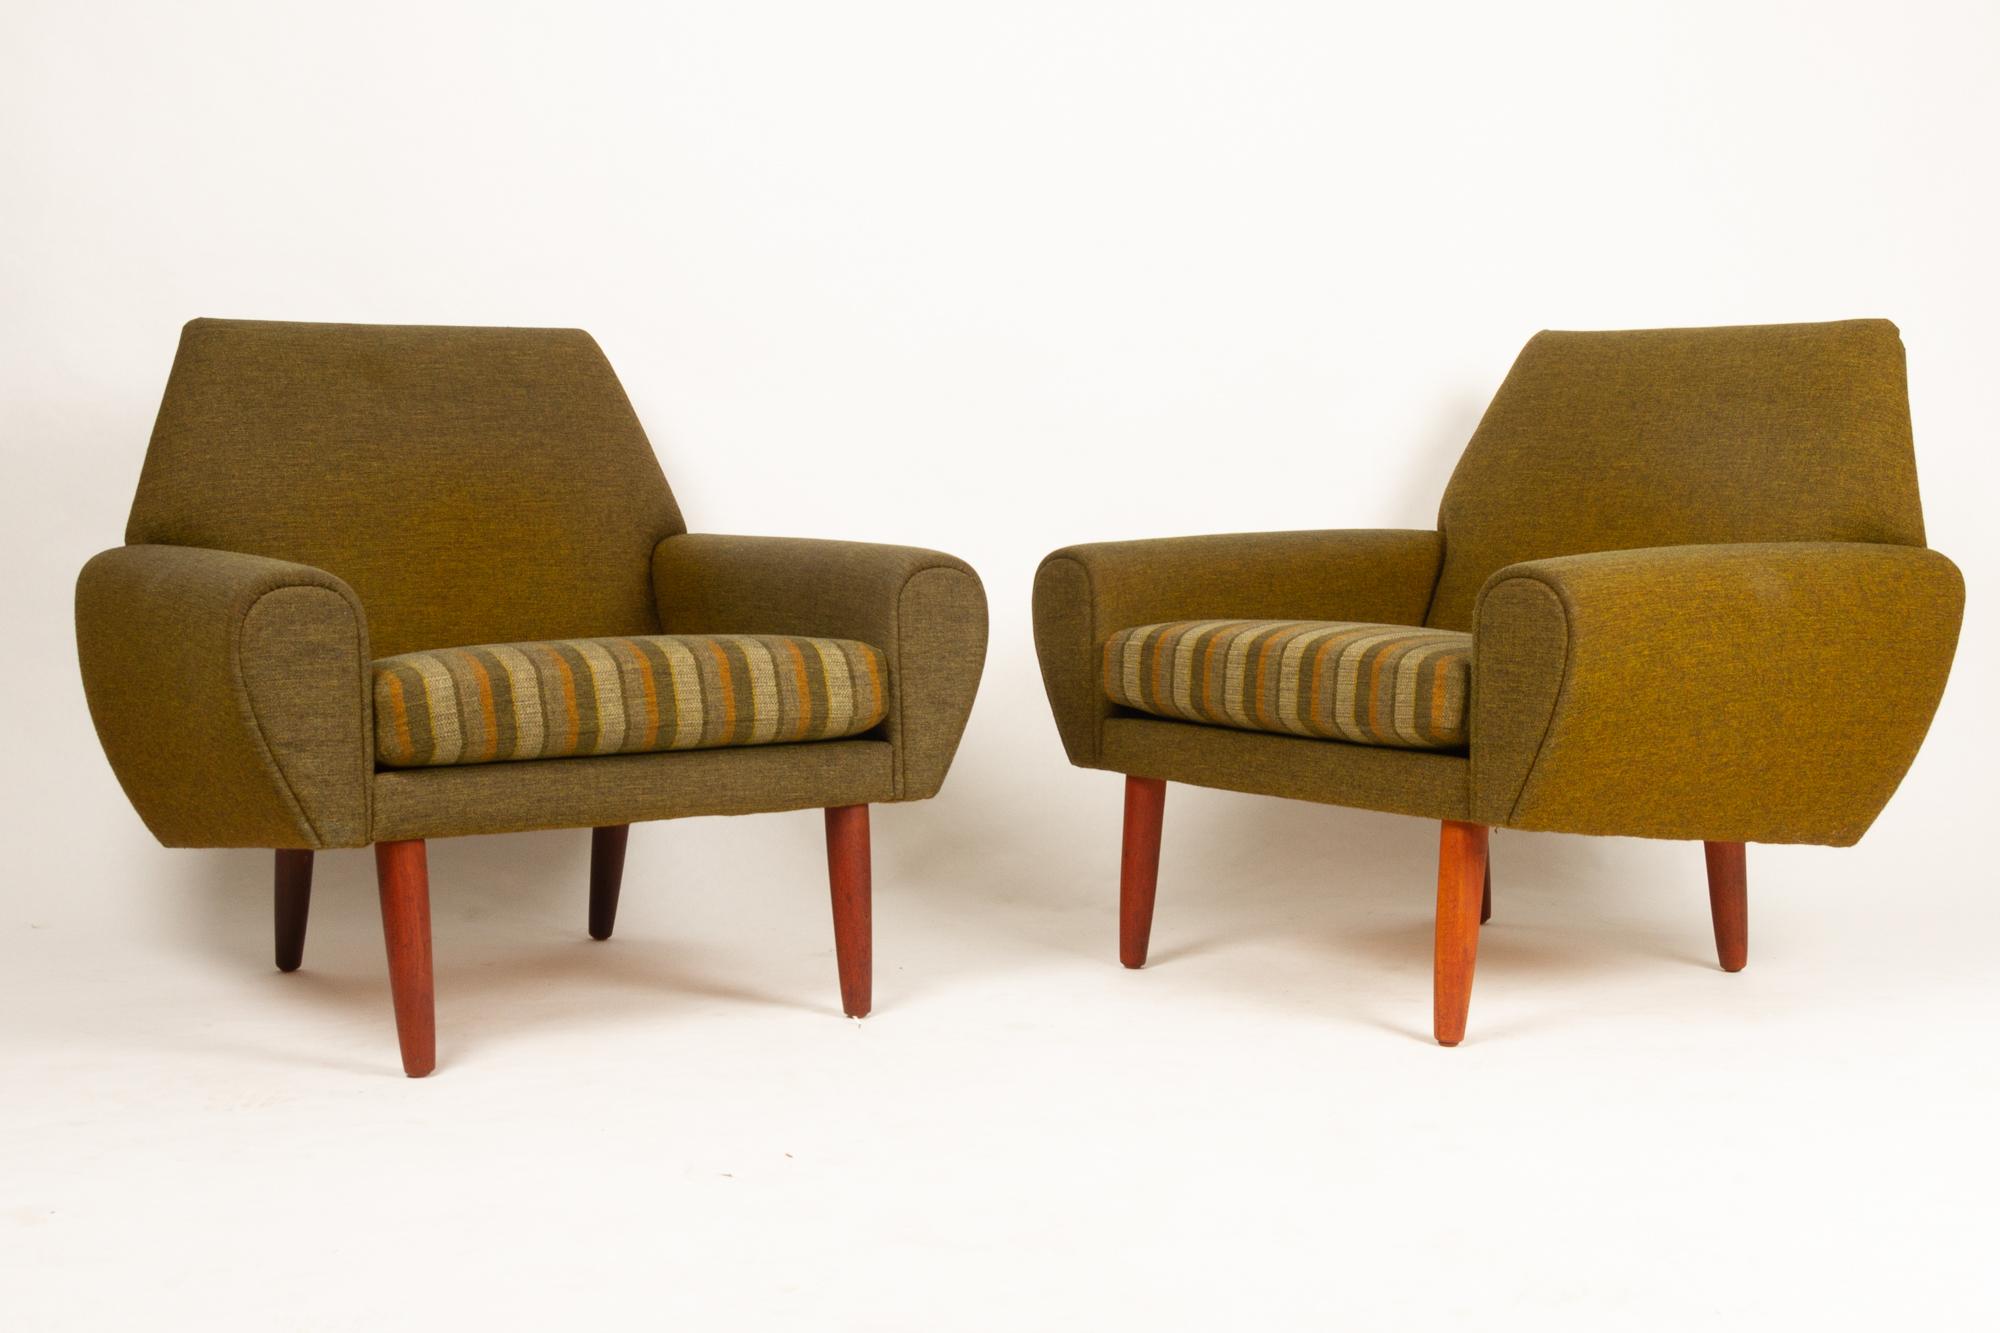 Danish pair of lounge chairs by Kurt Østervig, 1960s.
Mid-Century Modern pair of green upholstered easy chairs with spring cushions. Attributed to Danish designer Kurt Østervig. Standing on round tapered legs in solid teak. Very comfortable and